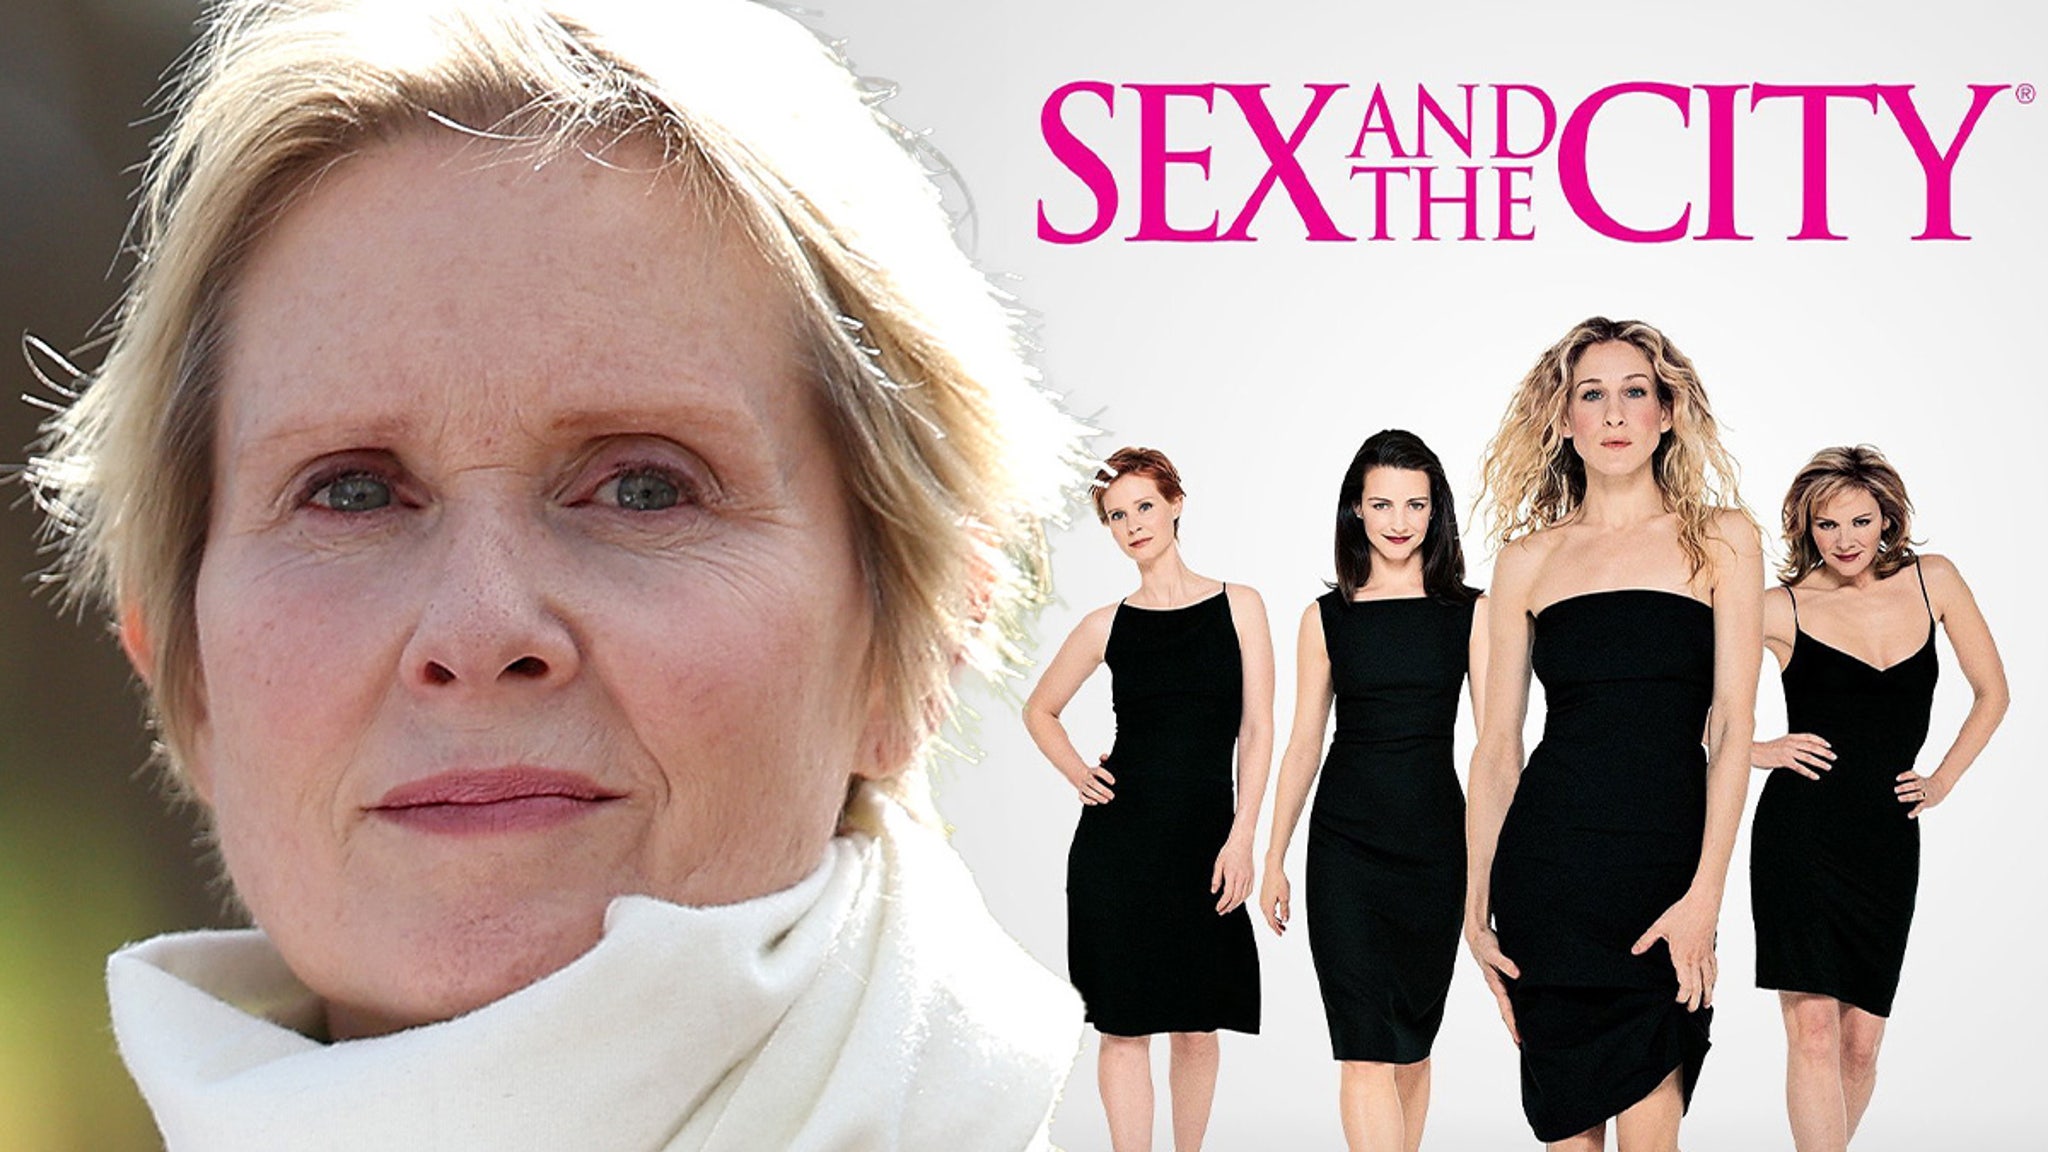 'Sex and the City' Cynthia Nixon Says Trolls Called Cast 'Gay Men in Disguise'